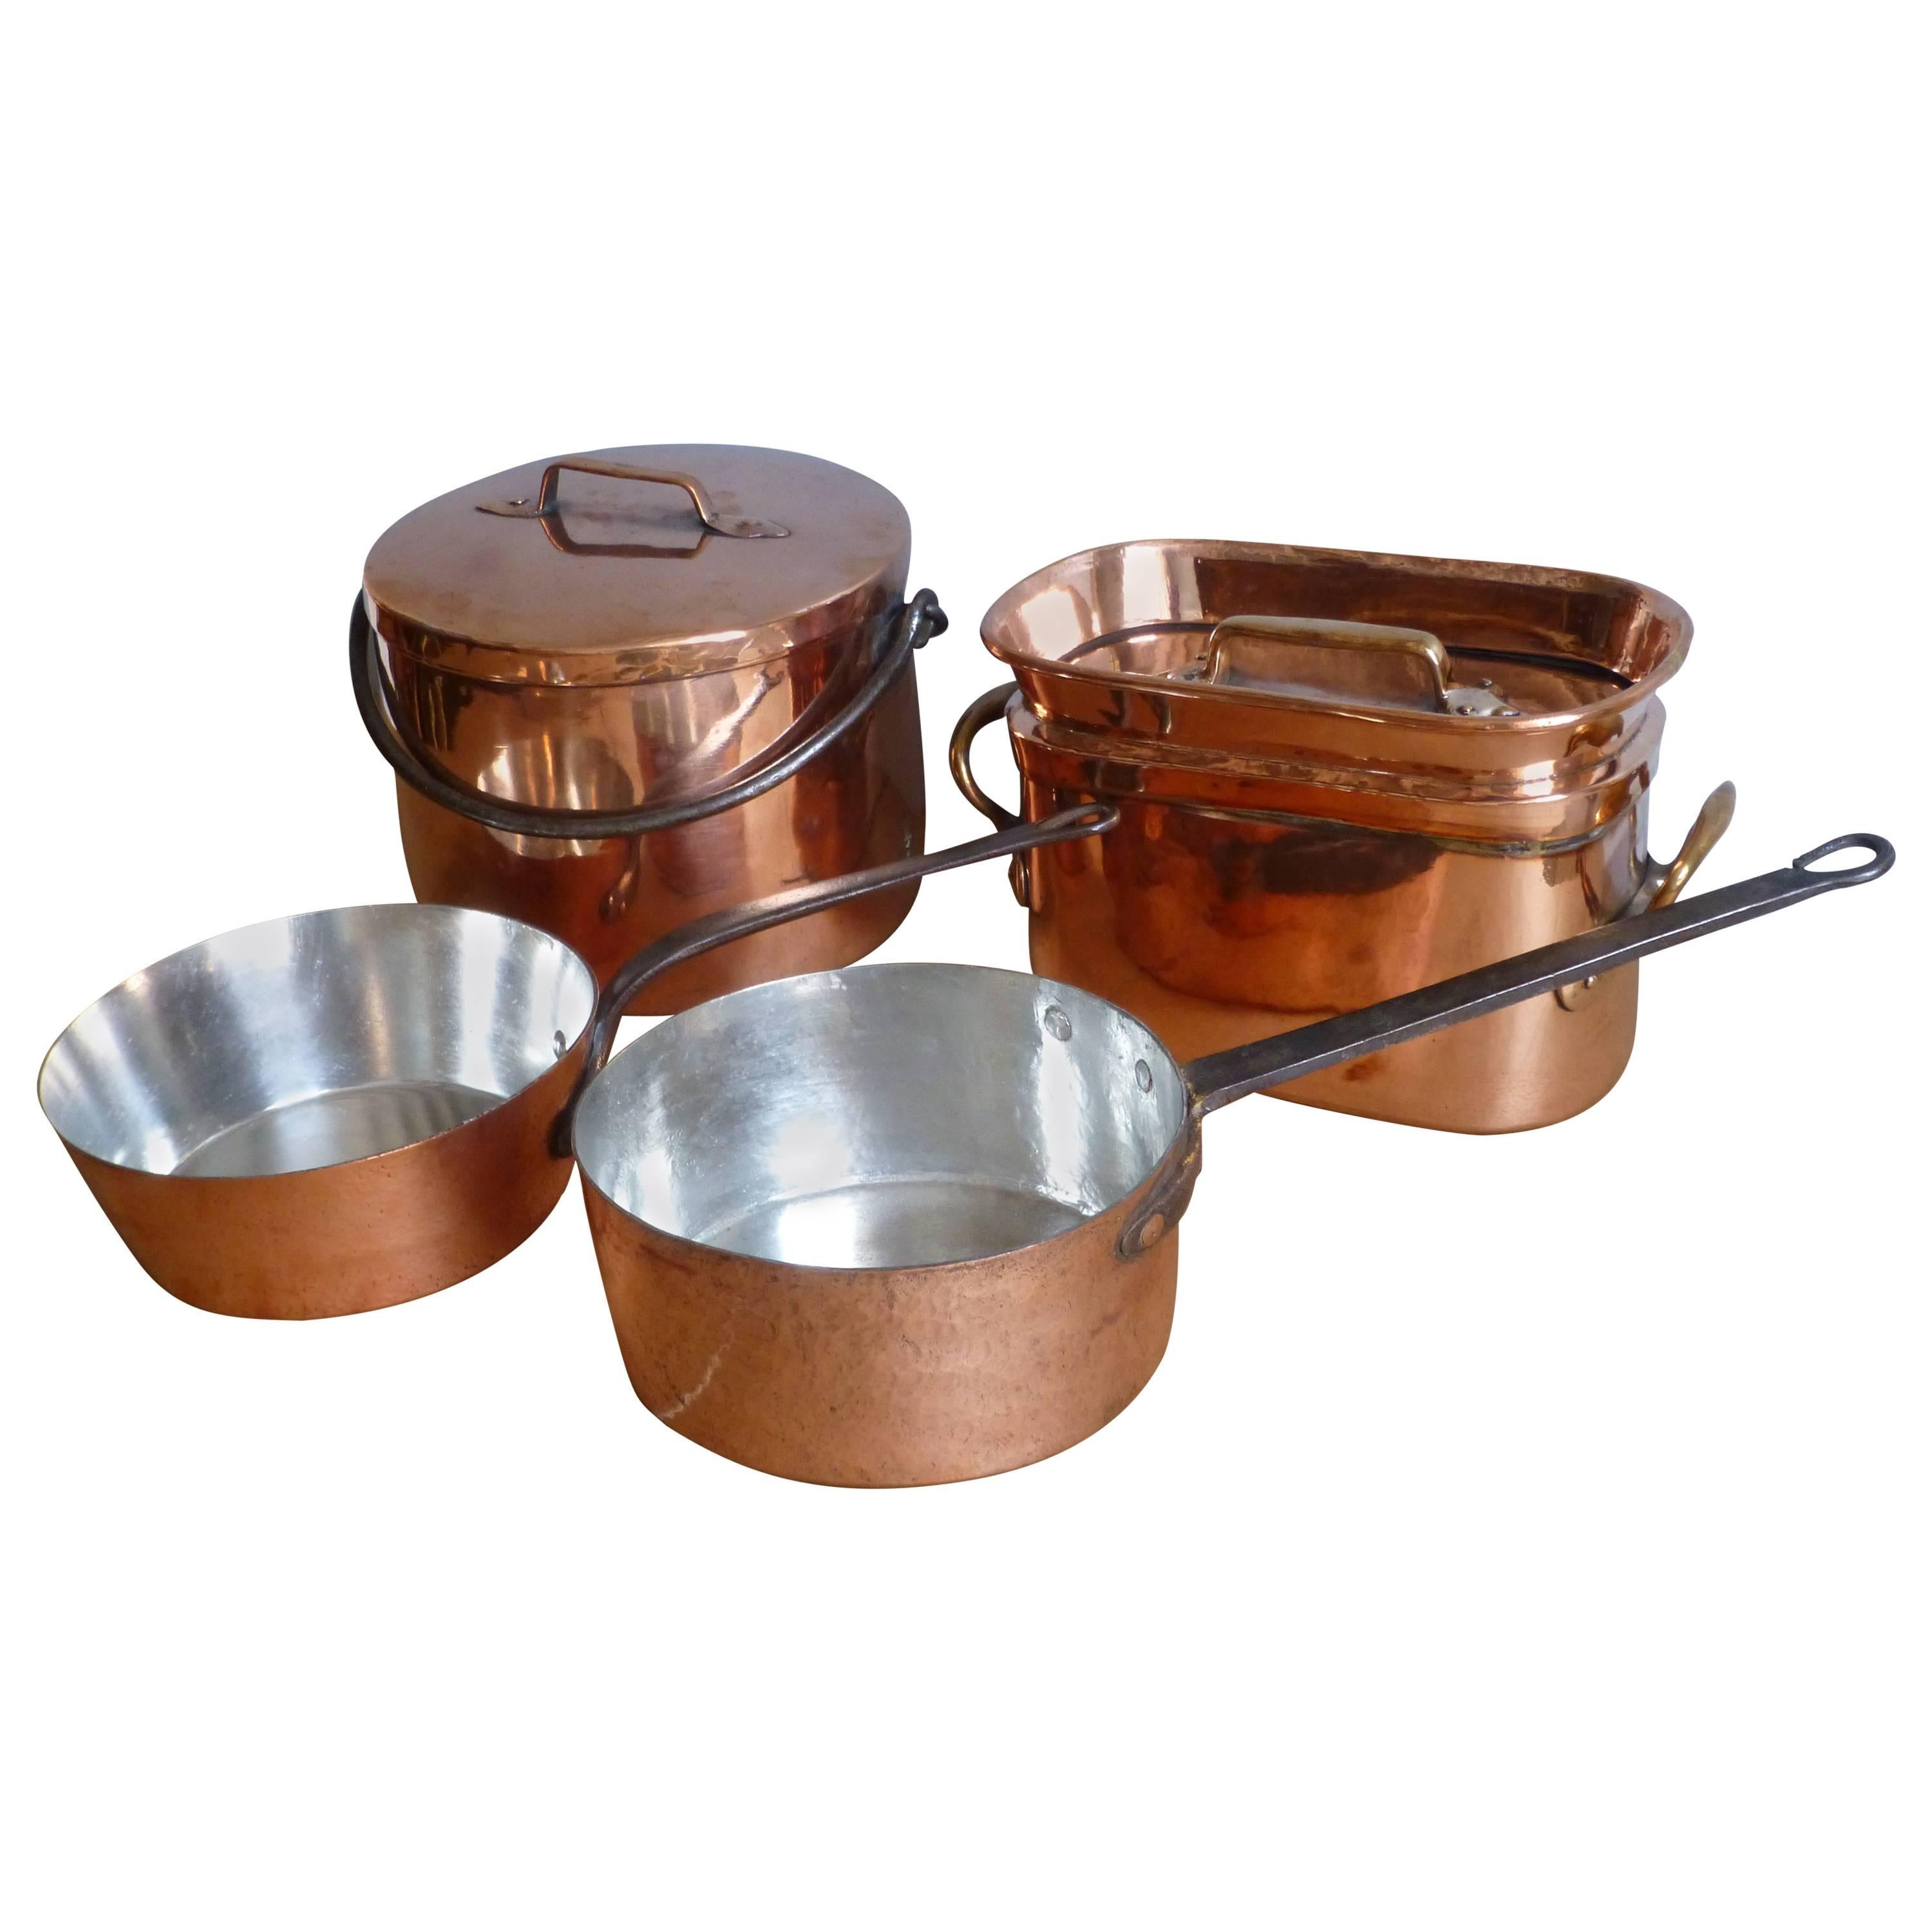 Magnificent Set of Re-Tinned Copper Pans and Pots